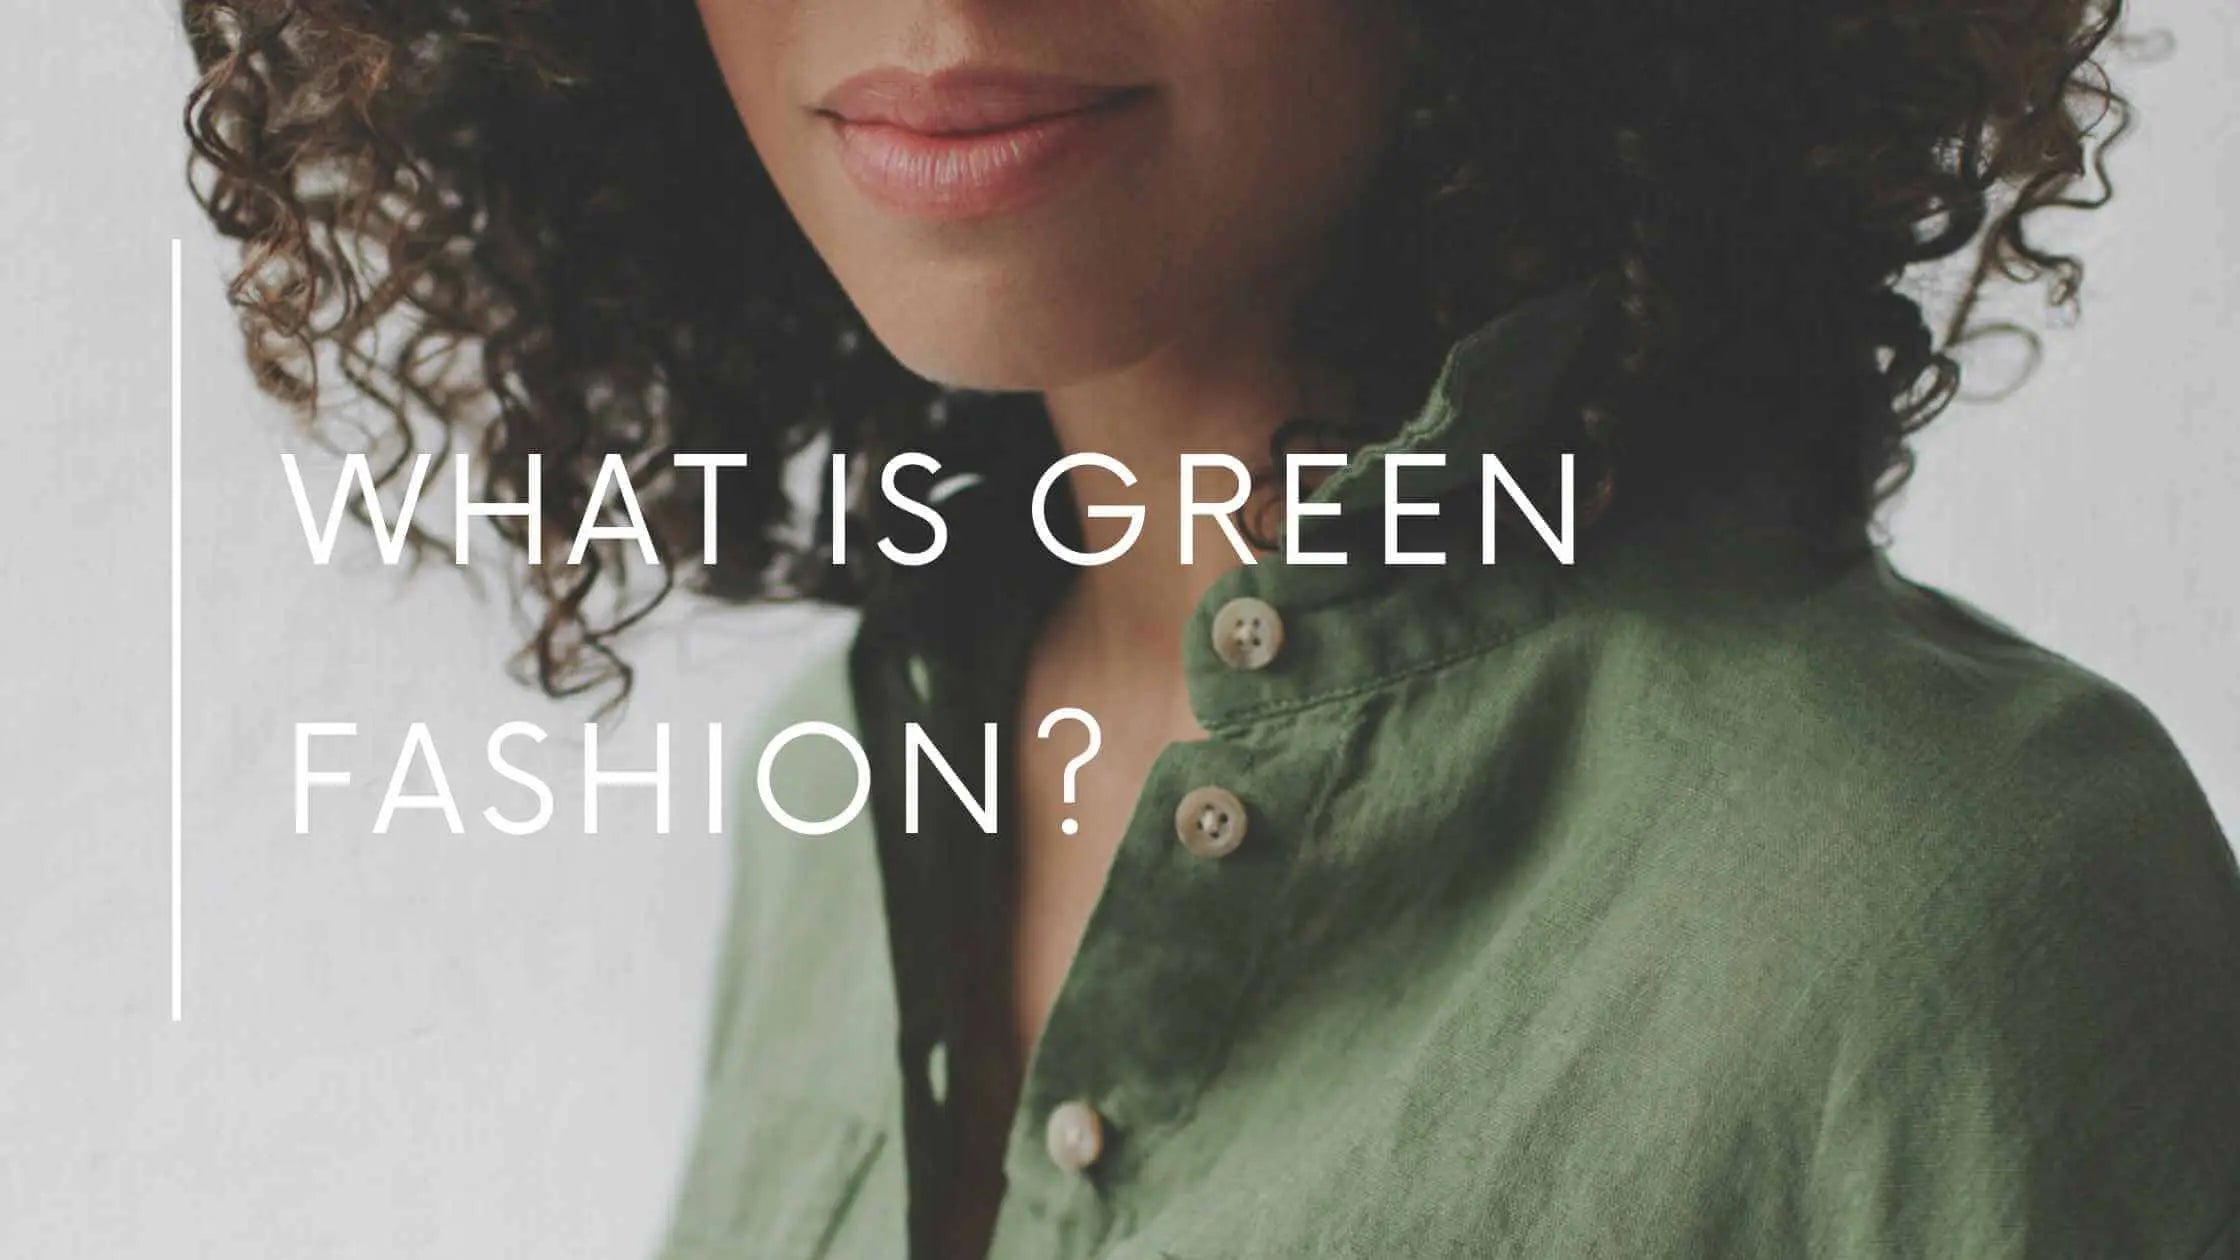 What is green fashion?